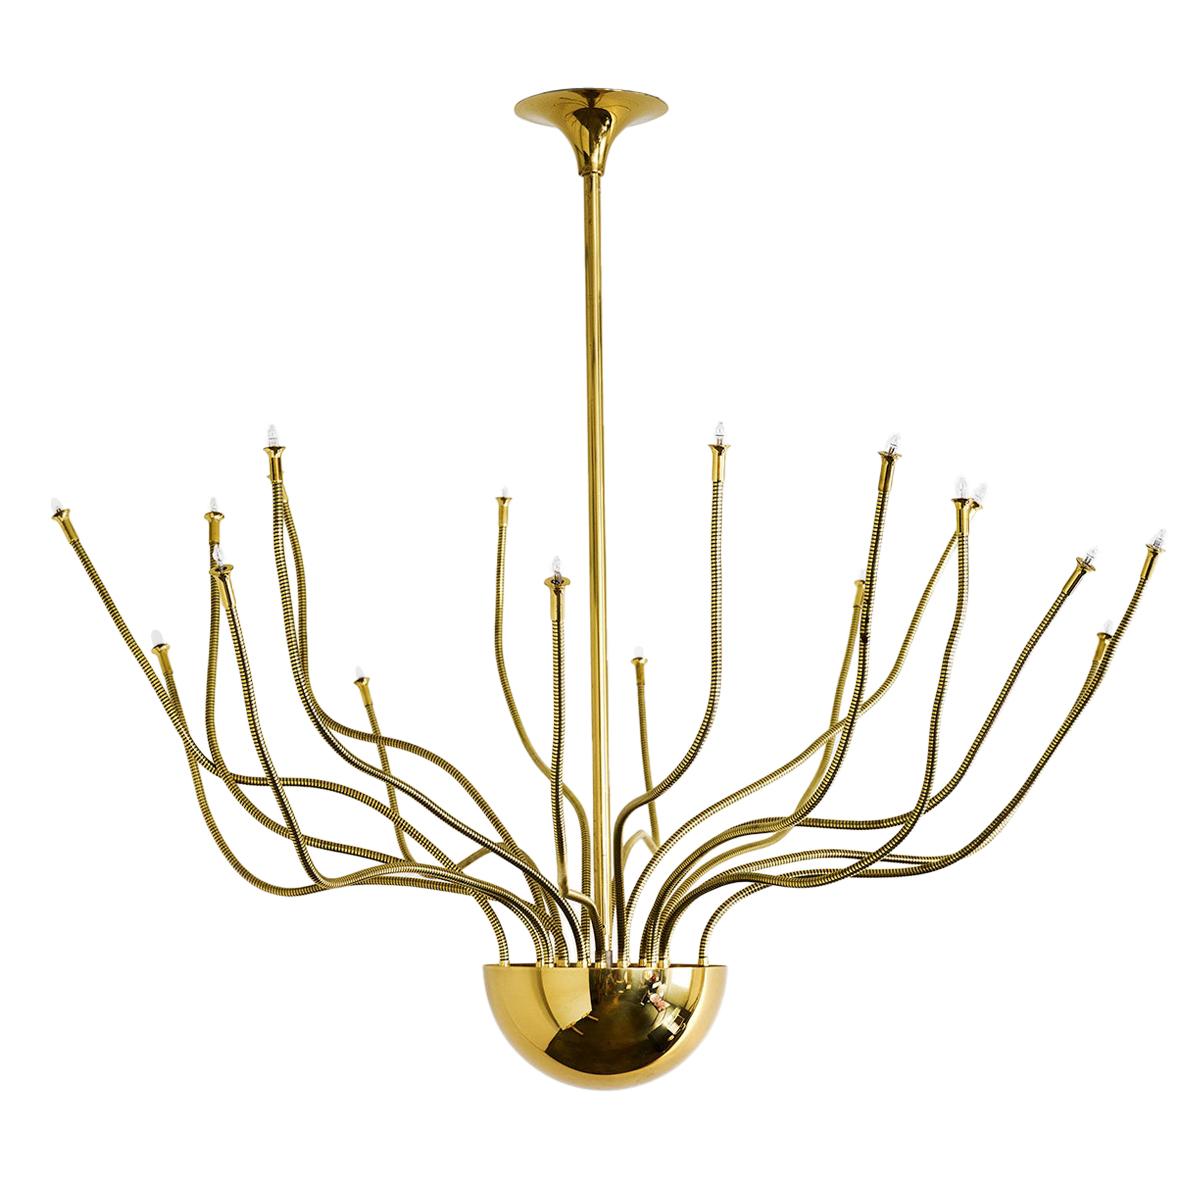 Golden brass ceiling lamp by Florian Schulz, Germany, 1980